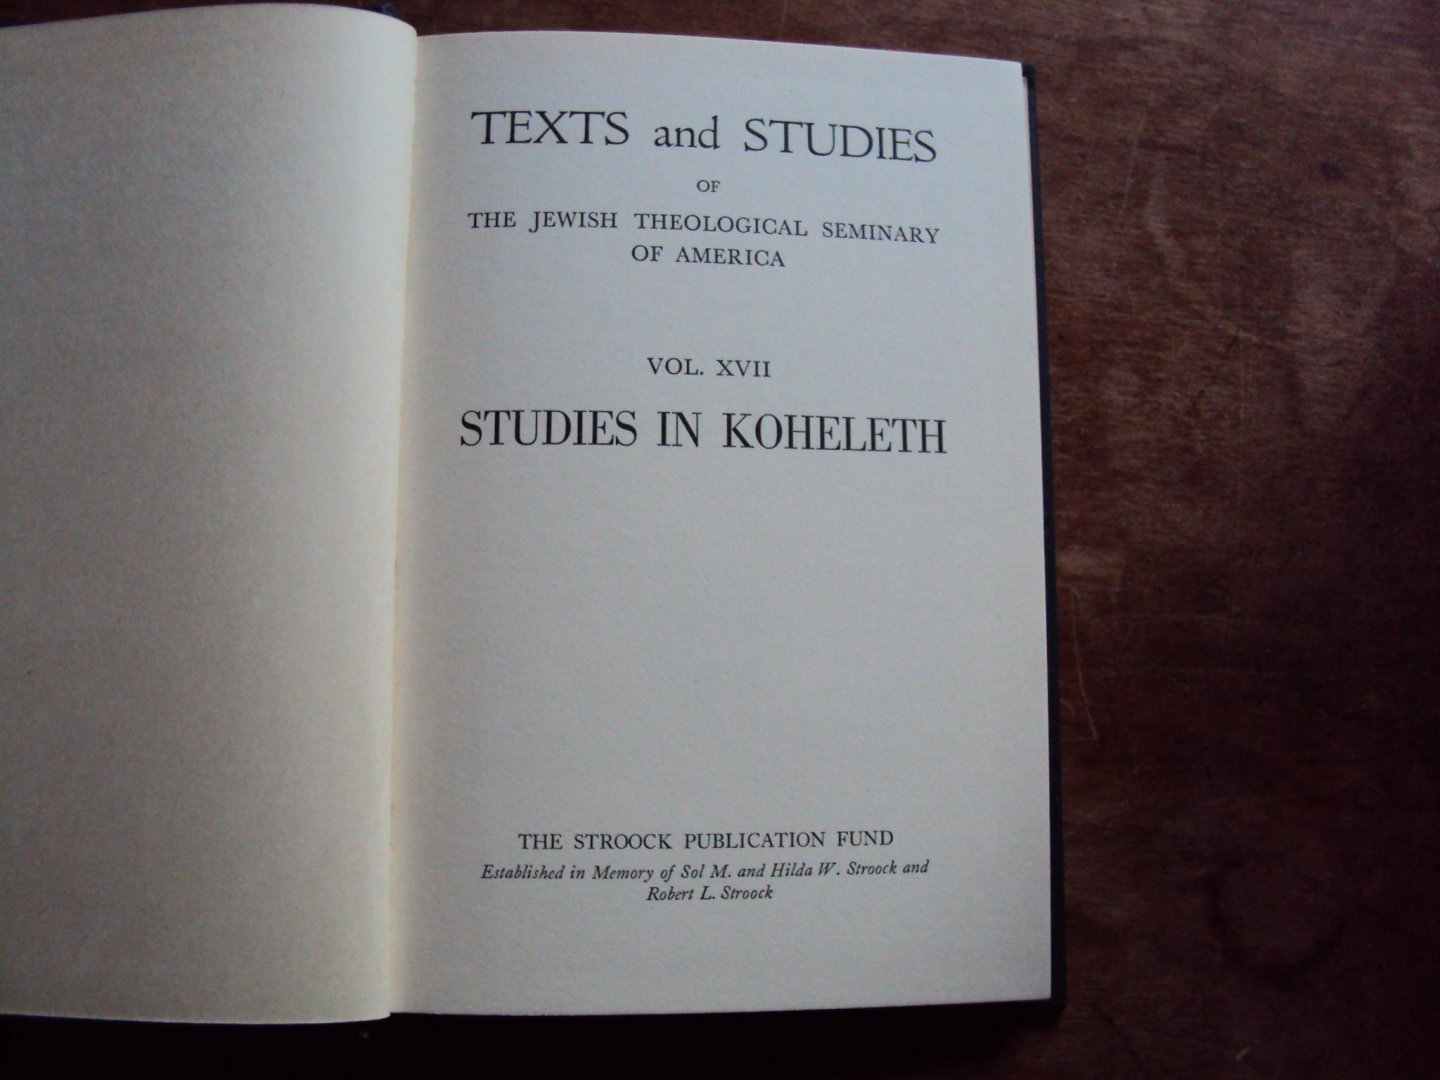 Ginsberg, H. Louis - Studies in Koheleth (Texts and Studies of the Jewish Theological Seminary of America Vol. XVII)